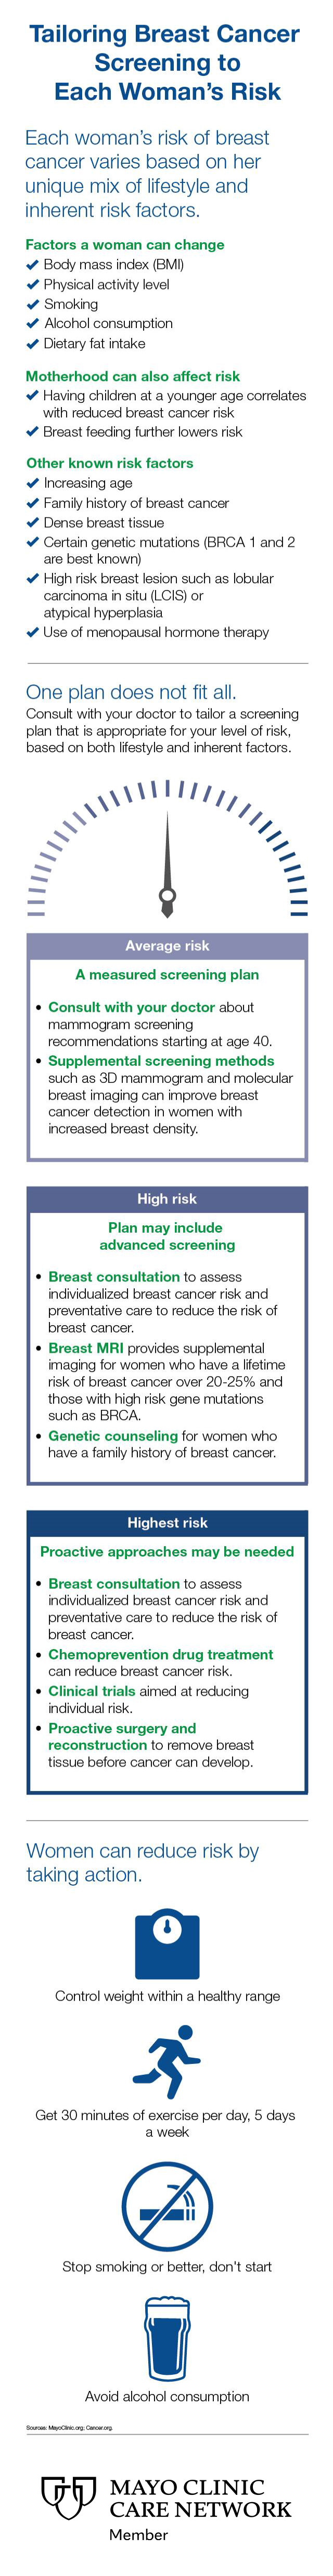 Infographic from the Mayo Clinic that discusses breast cancer risks women should be aware of and steps they can take to reduce their risk.